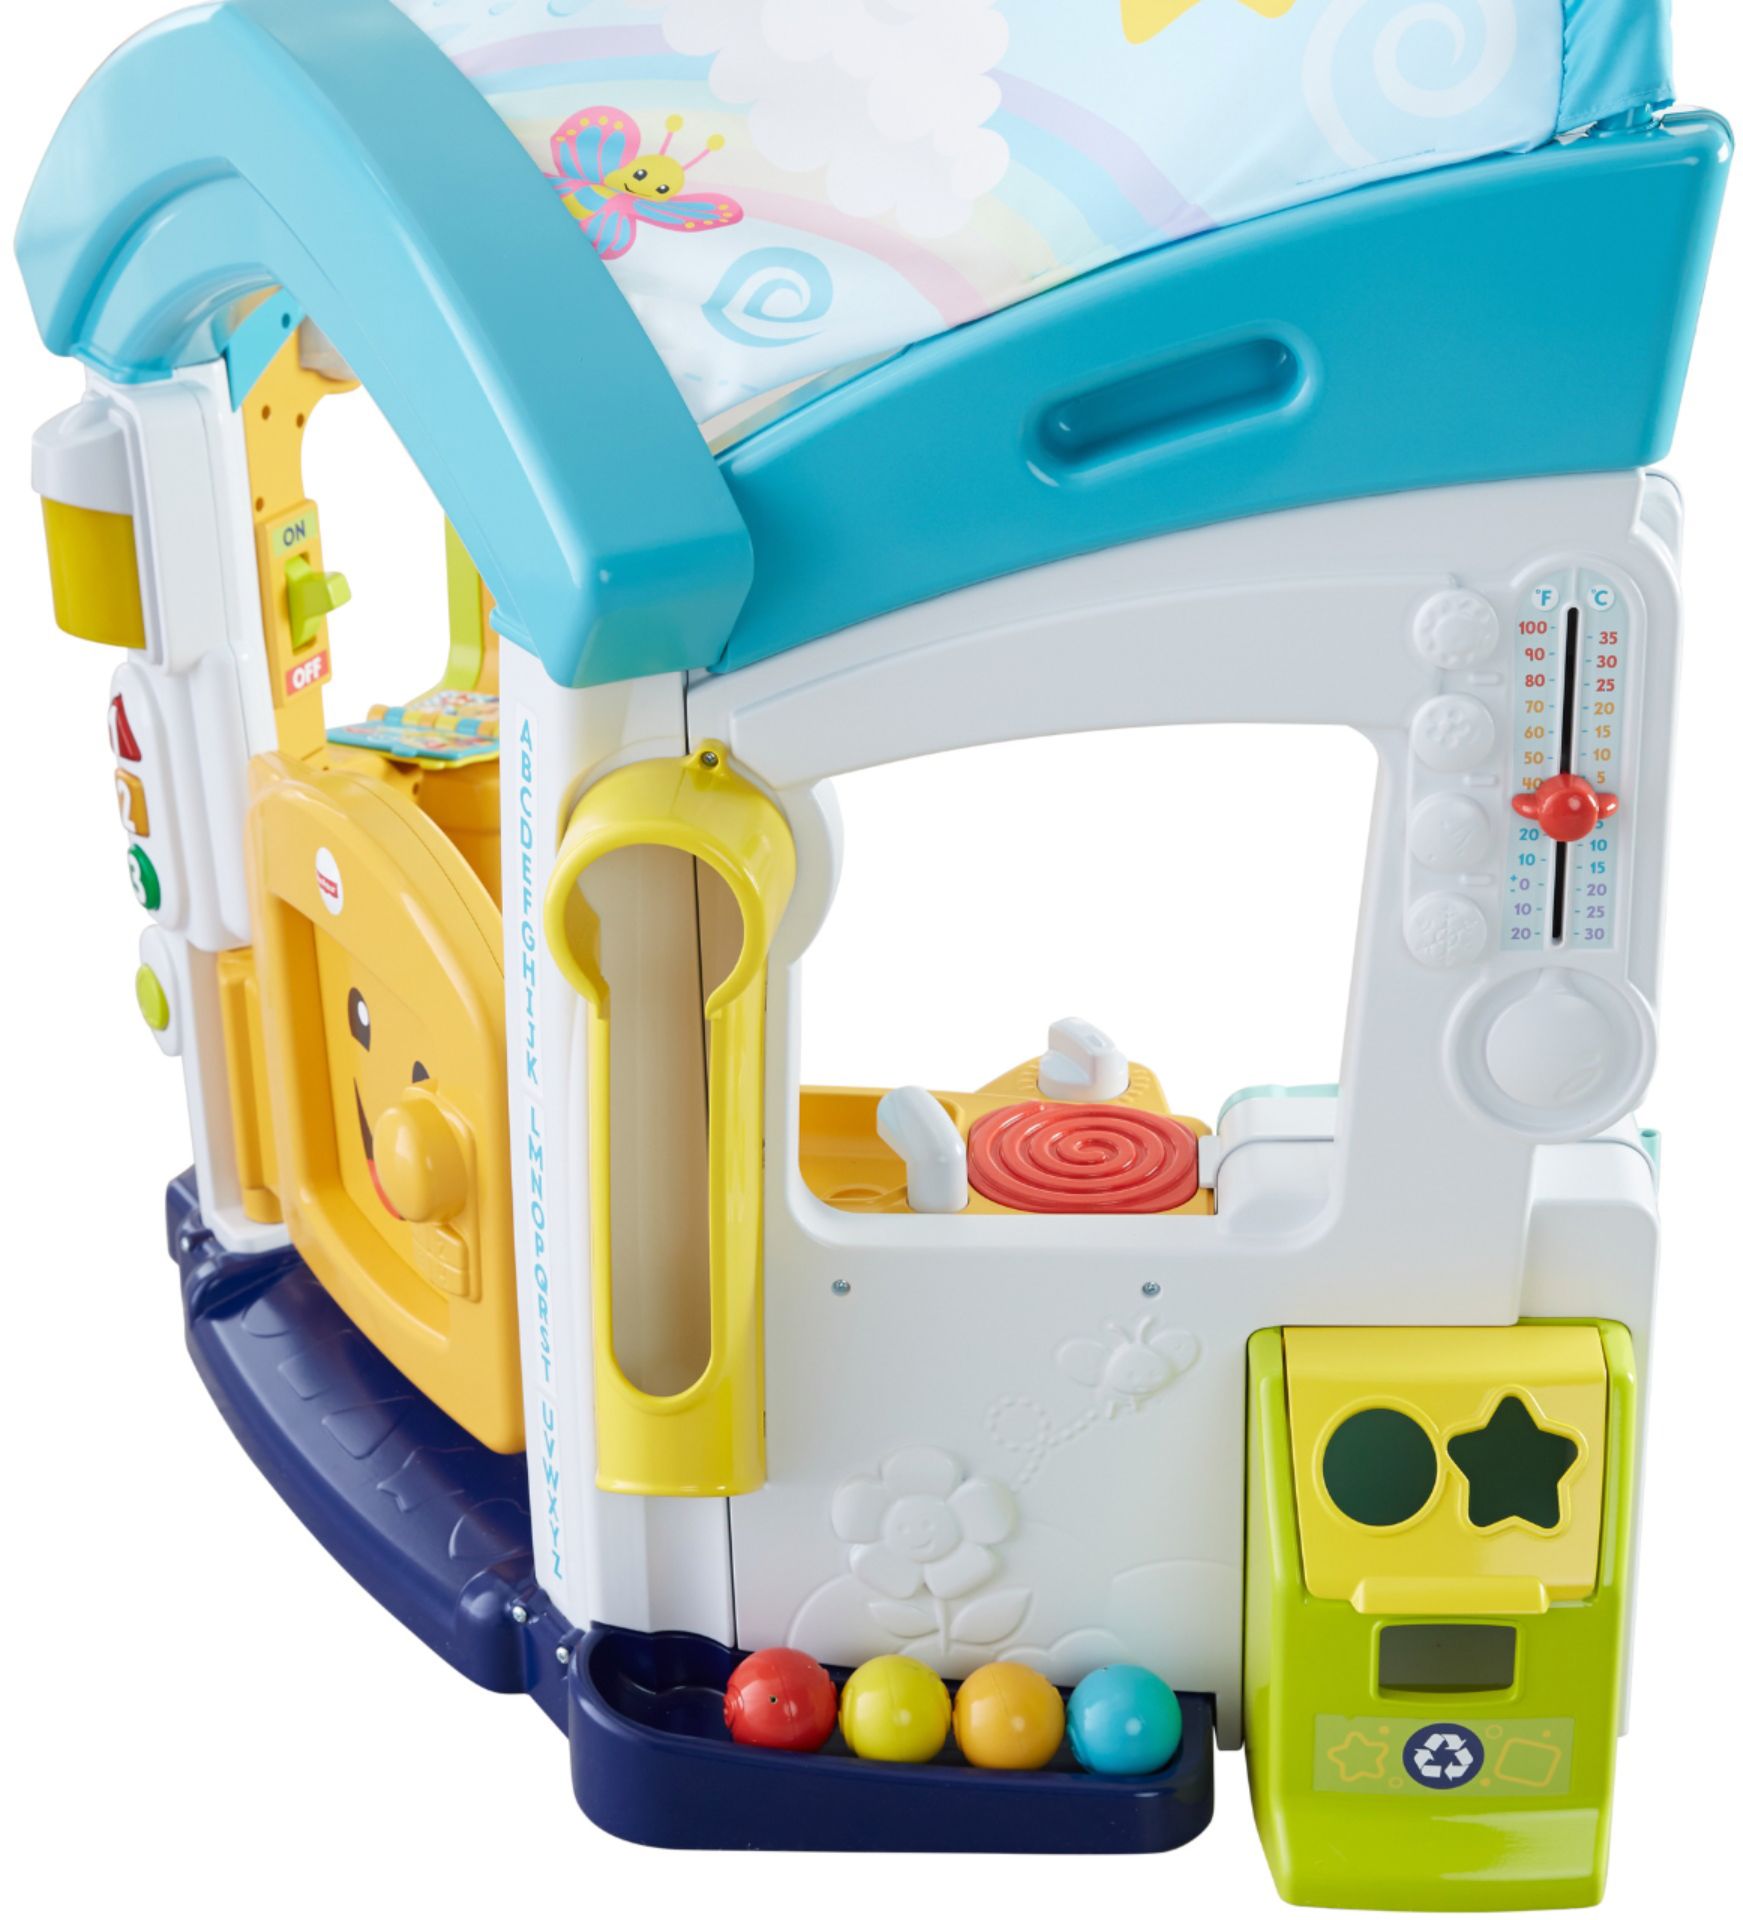 fisher price smart learning home amazon